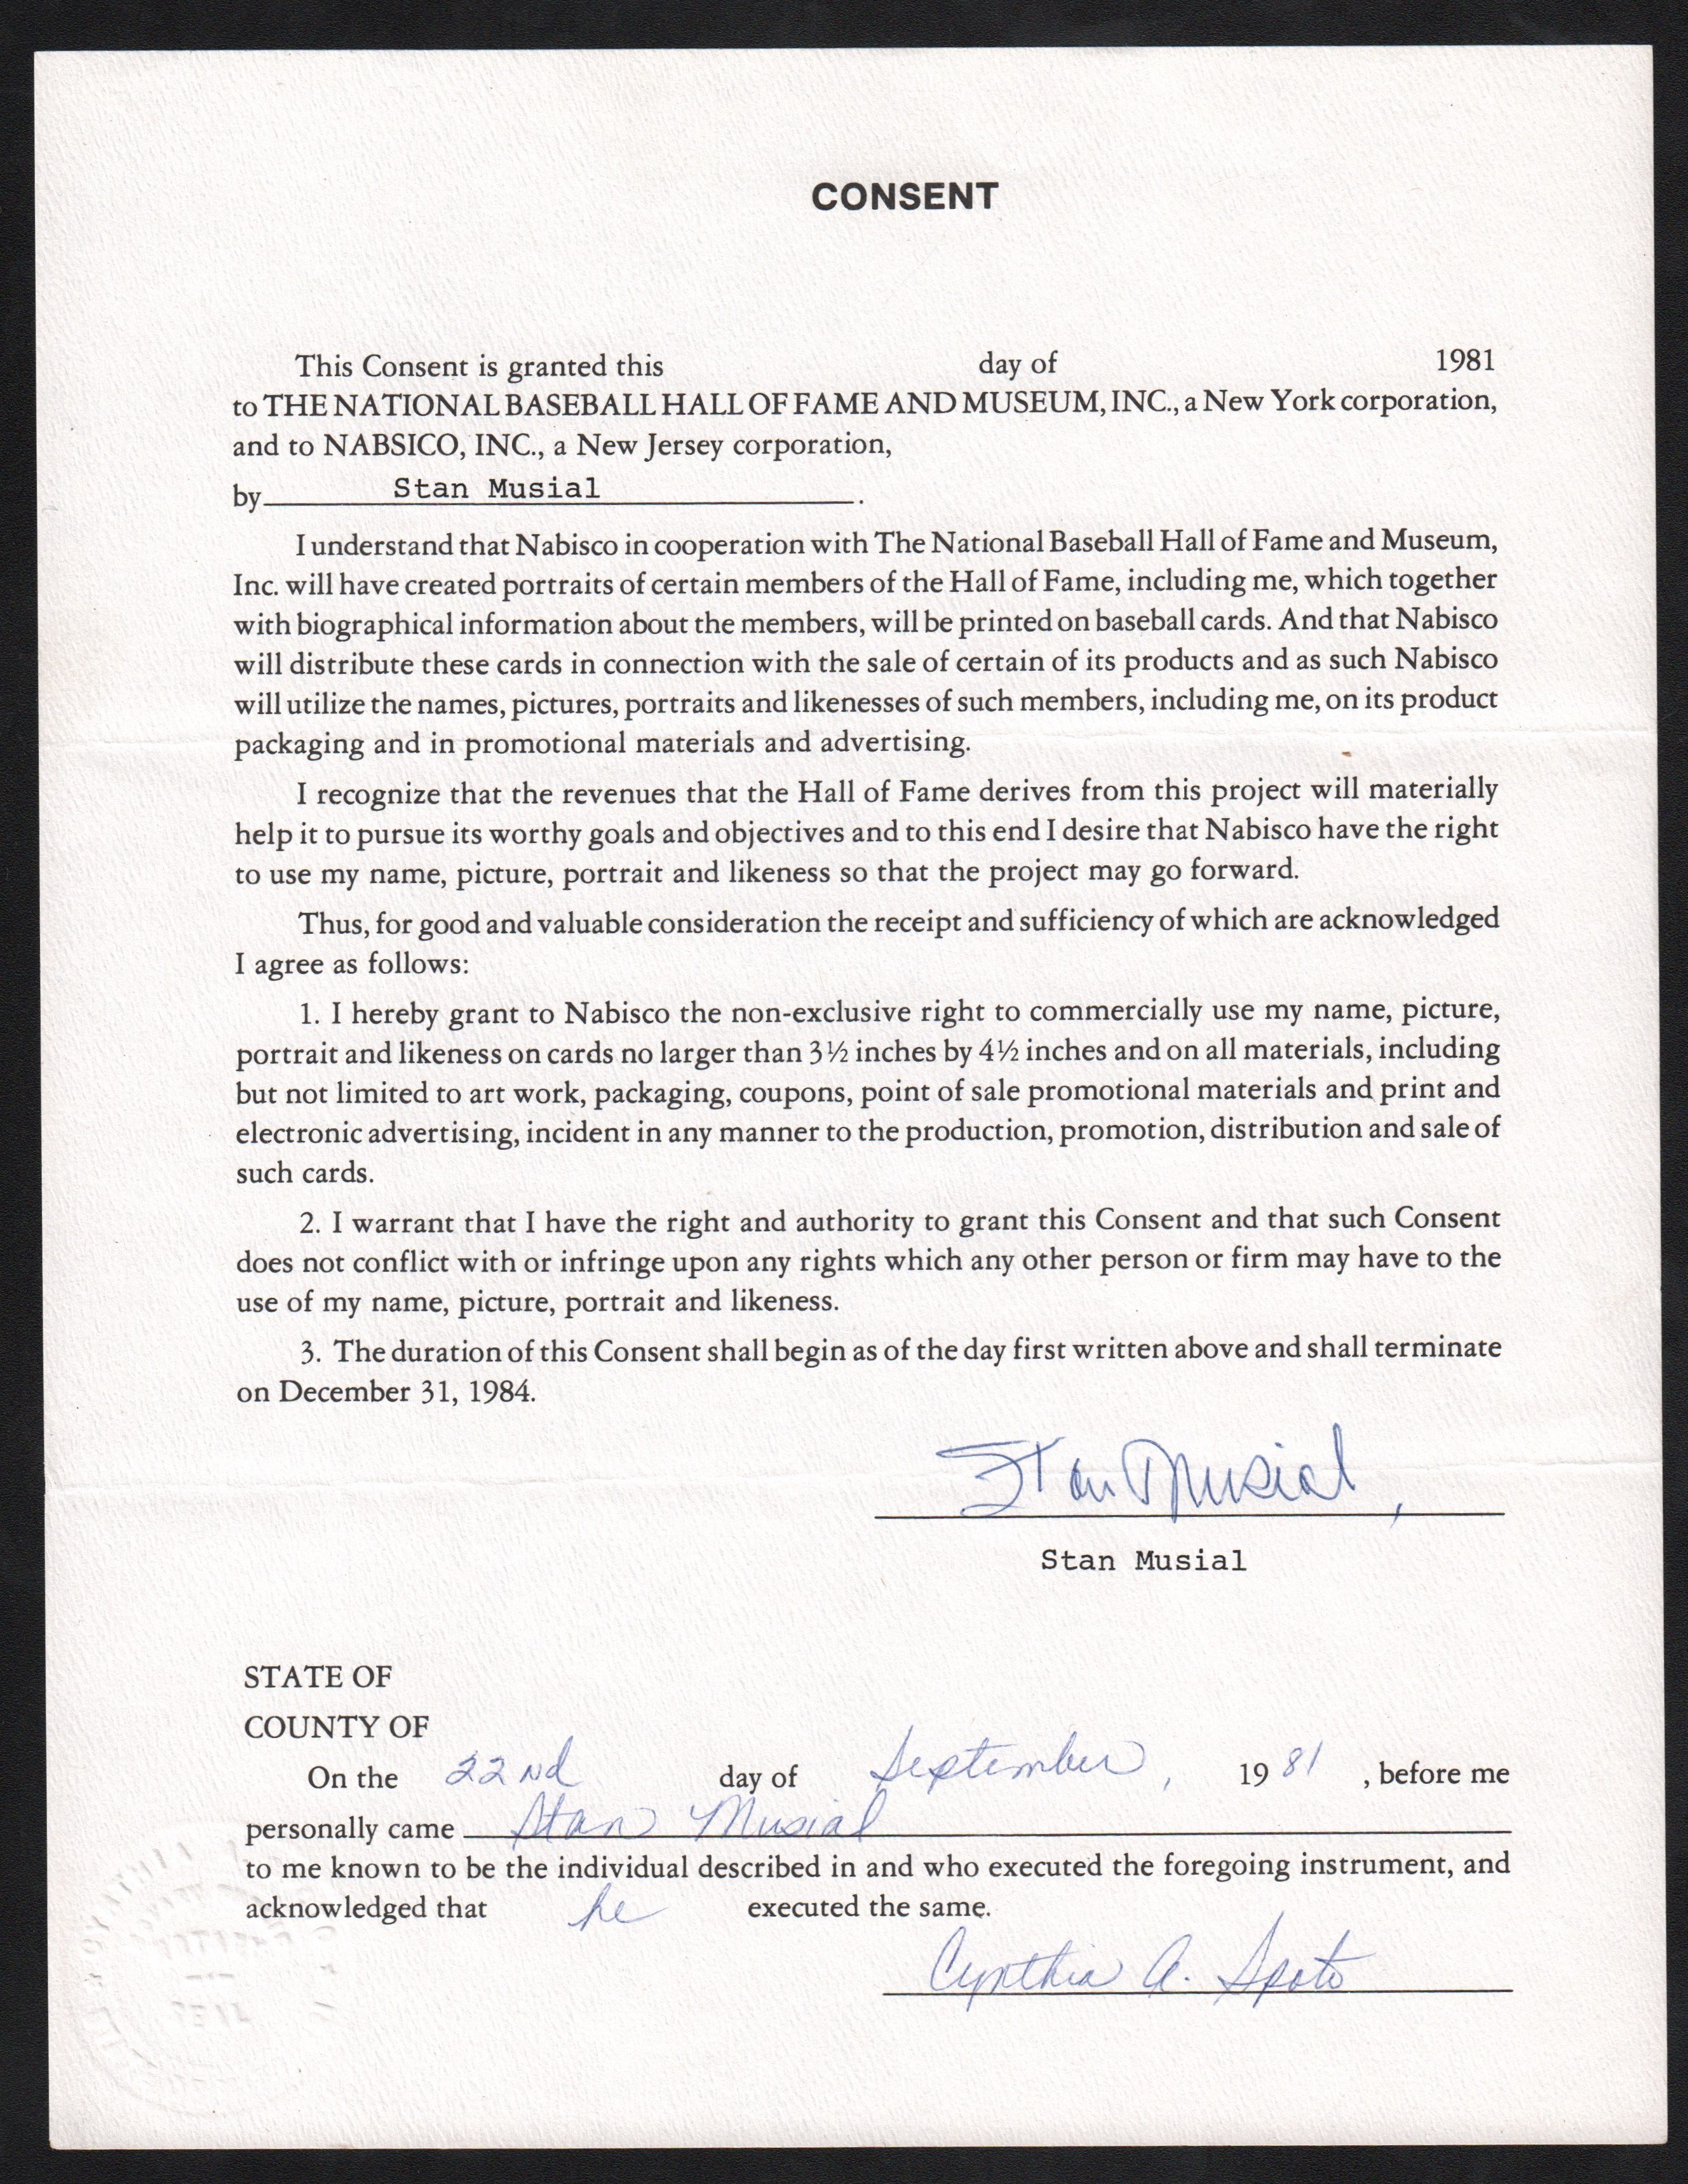 - Stan Musial 1981 Contract with Nabisco and HOF